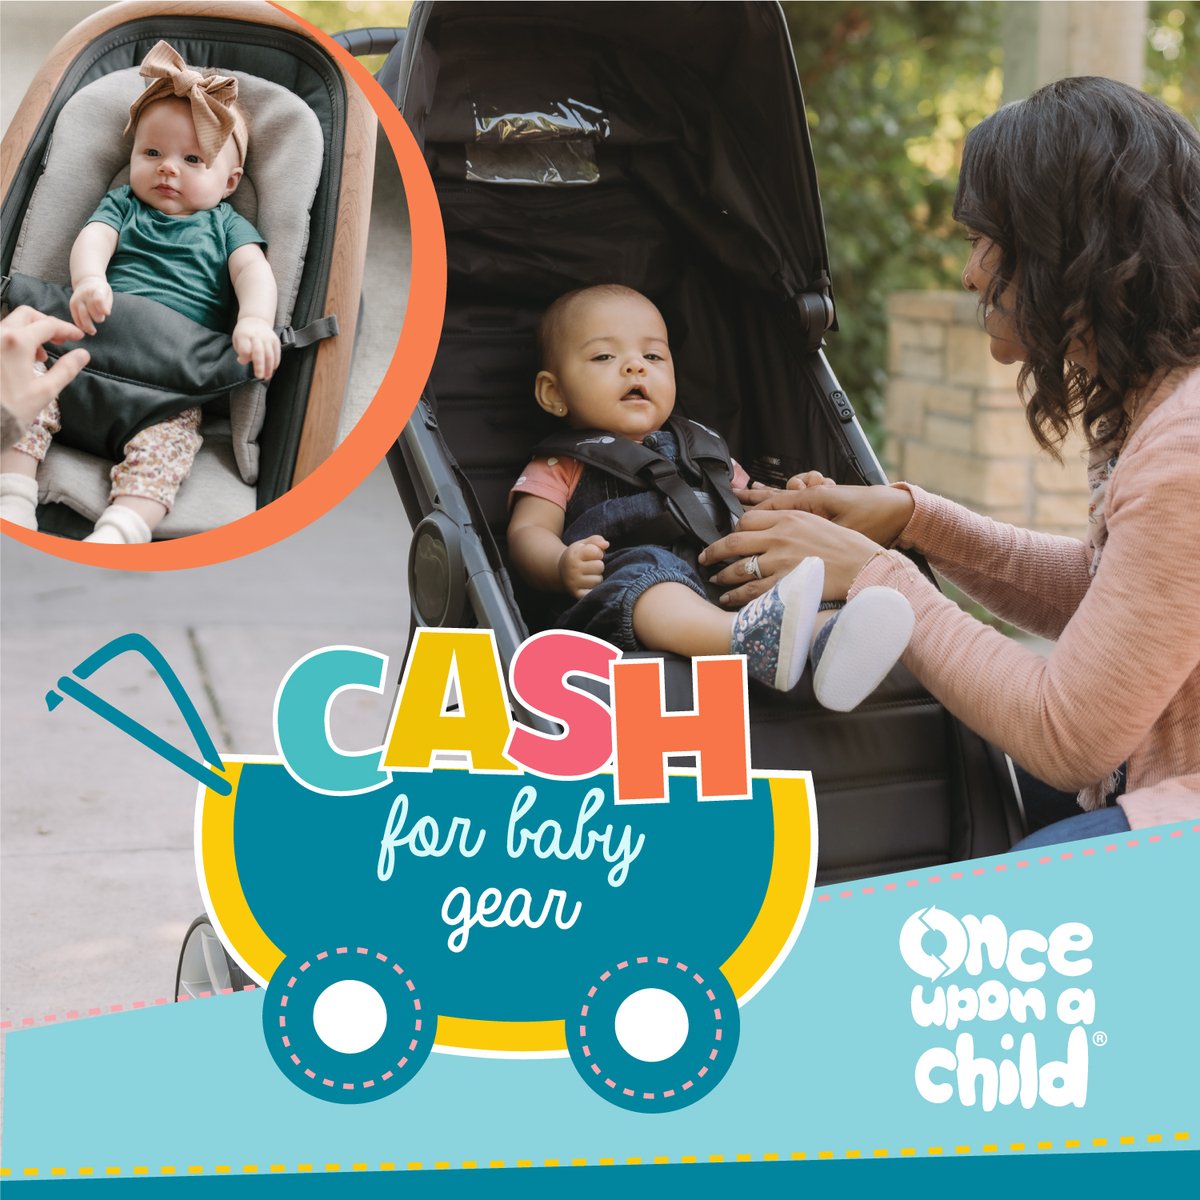 Stroll in with their outgrown baby gear ­­ like high chairs, strollers, bouncers, and more for a CASH offer today!#onceuponachild #babygear #babyresale #sellbuyrepeat